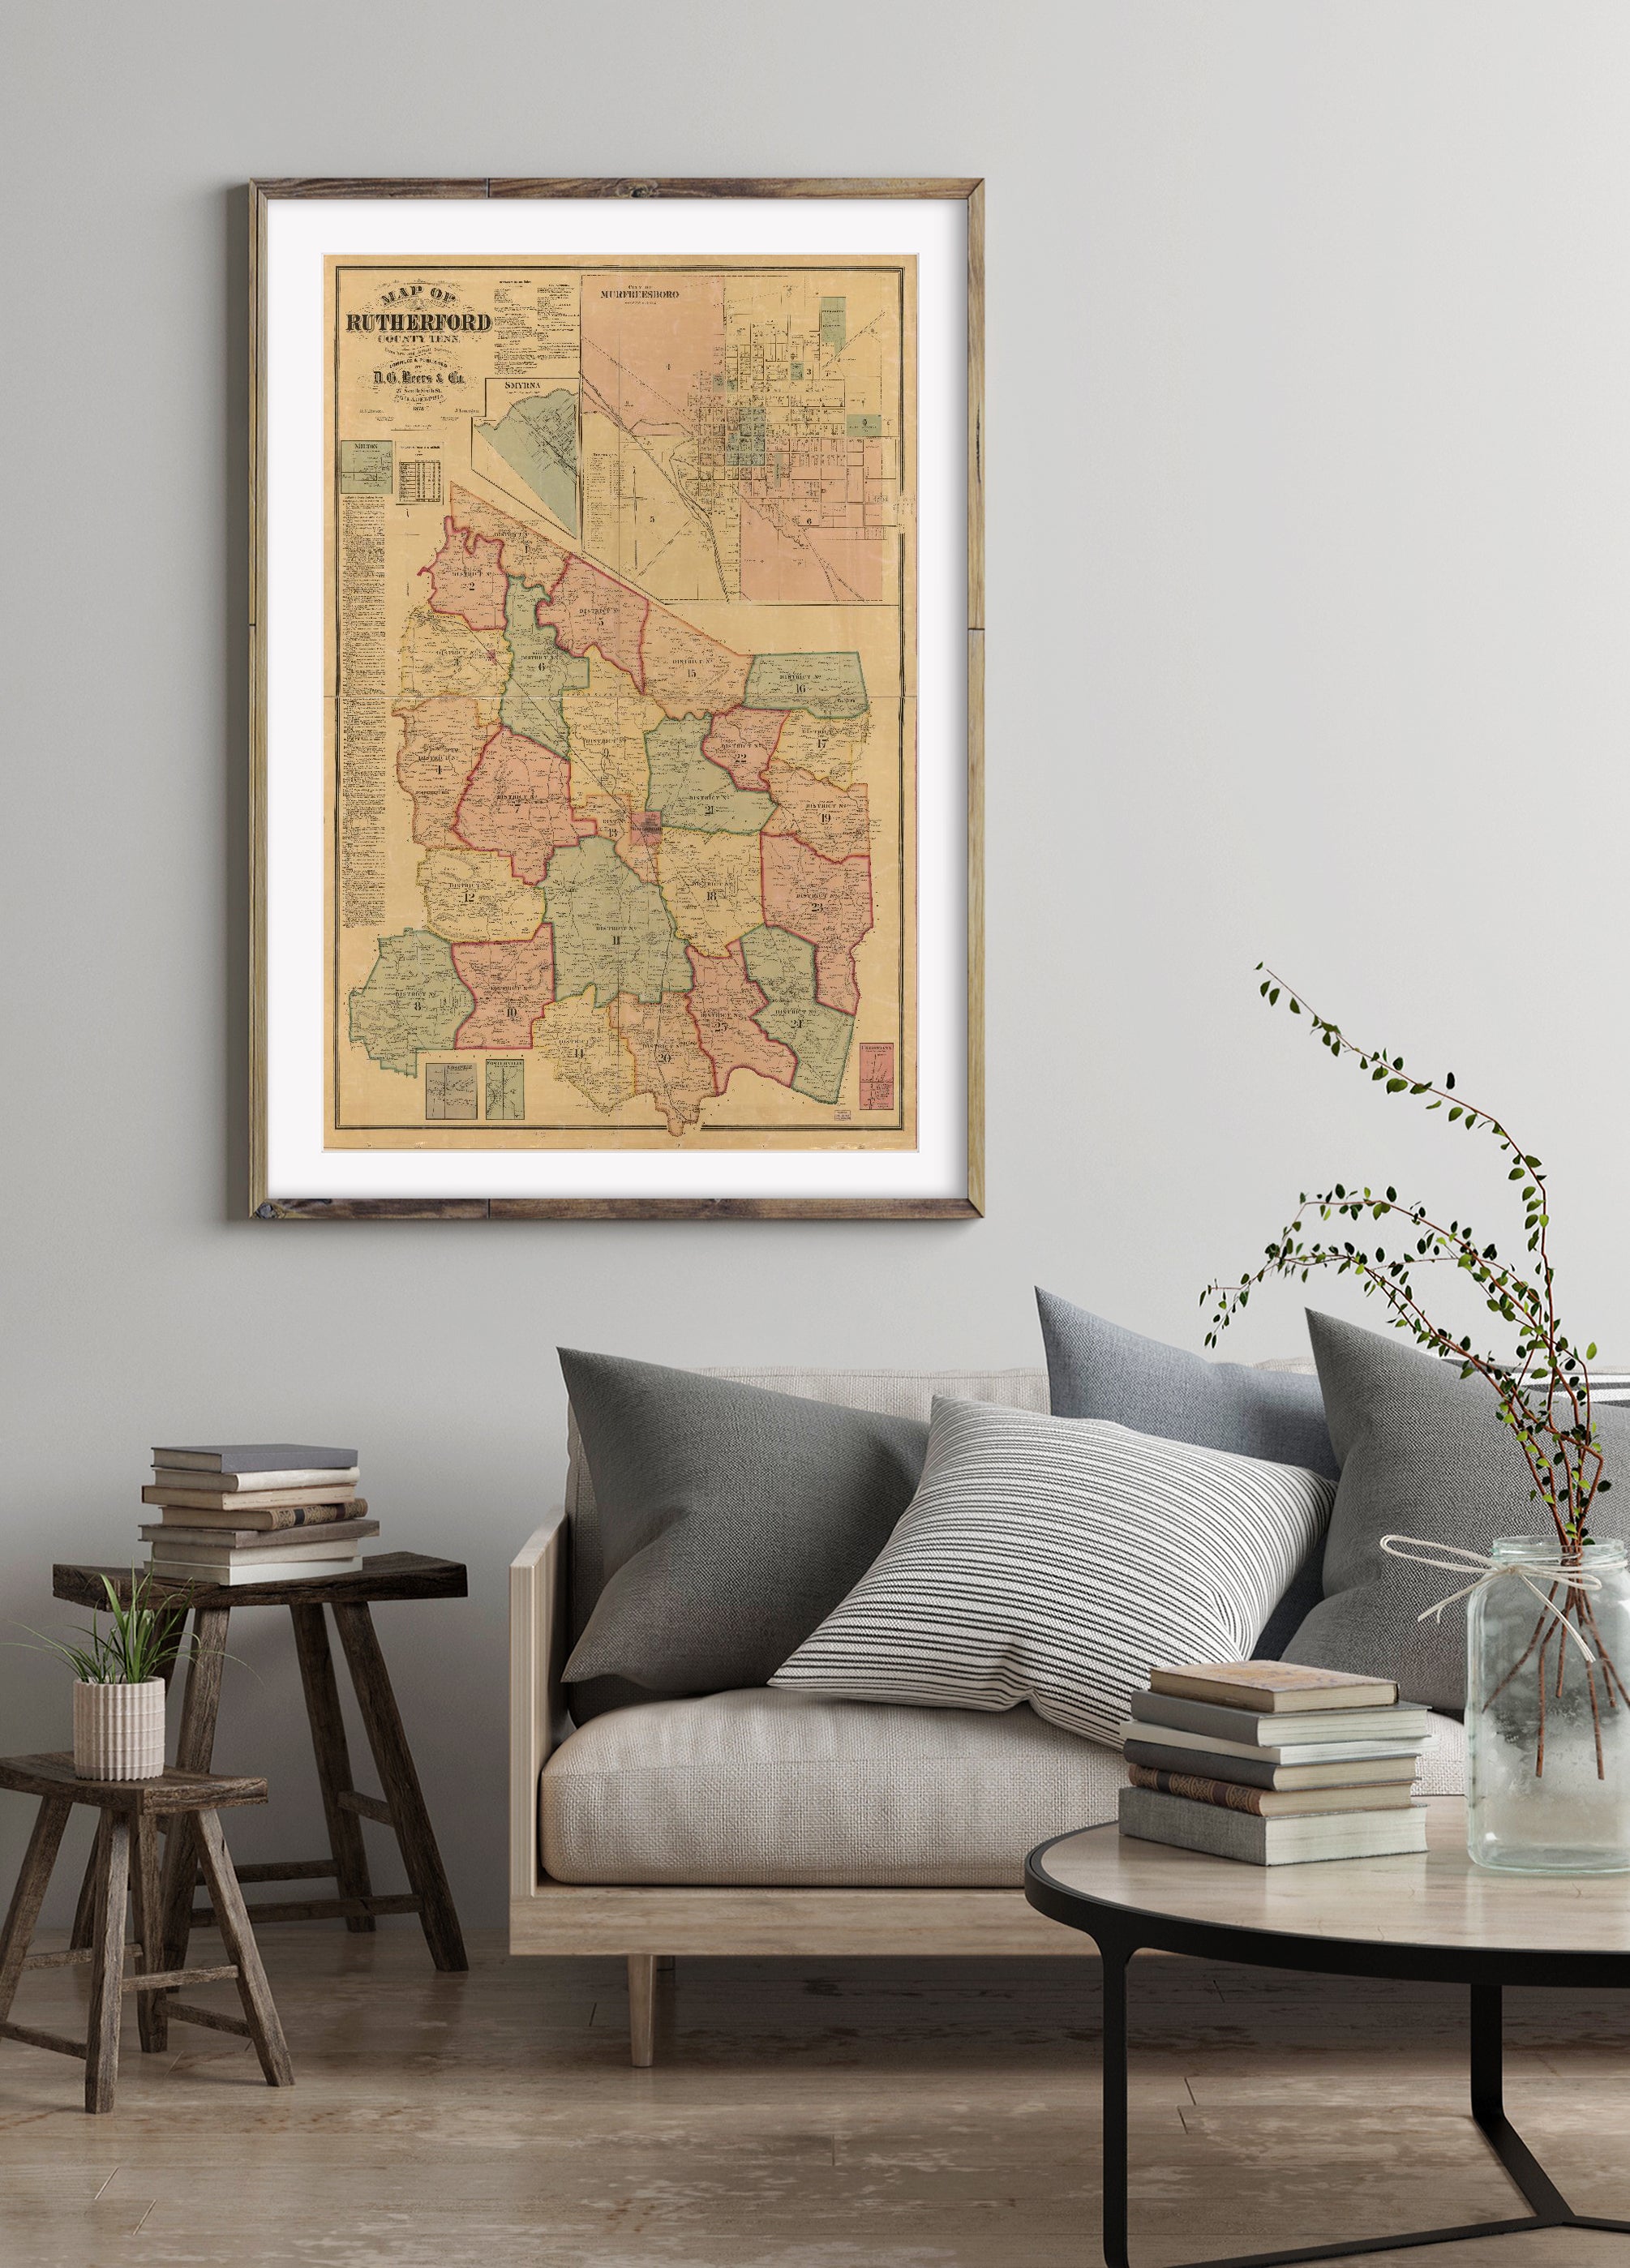 Vintage map: Shows roads, railroads, property tract lines, tract numbers, and landowners' names. Includes business directories, insets of Milton, Eagleville, Fosterville, Smyrna, City of Murfreesboro, and Christiana, list of names, and table of populatio